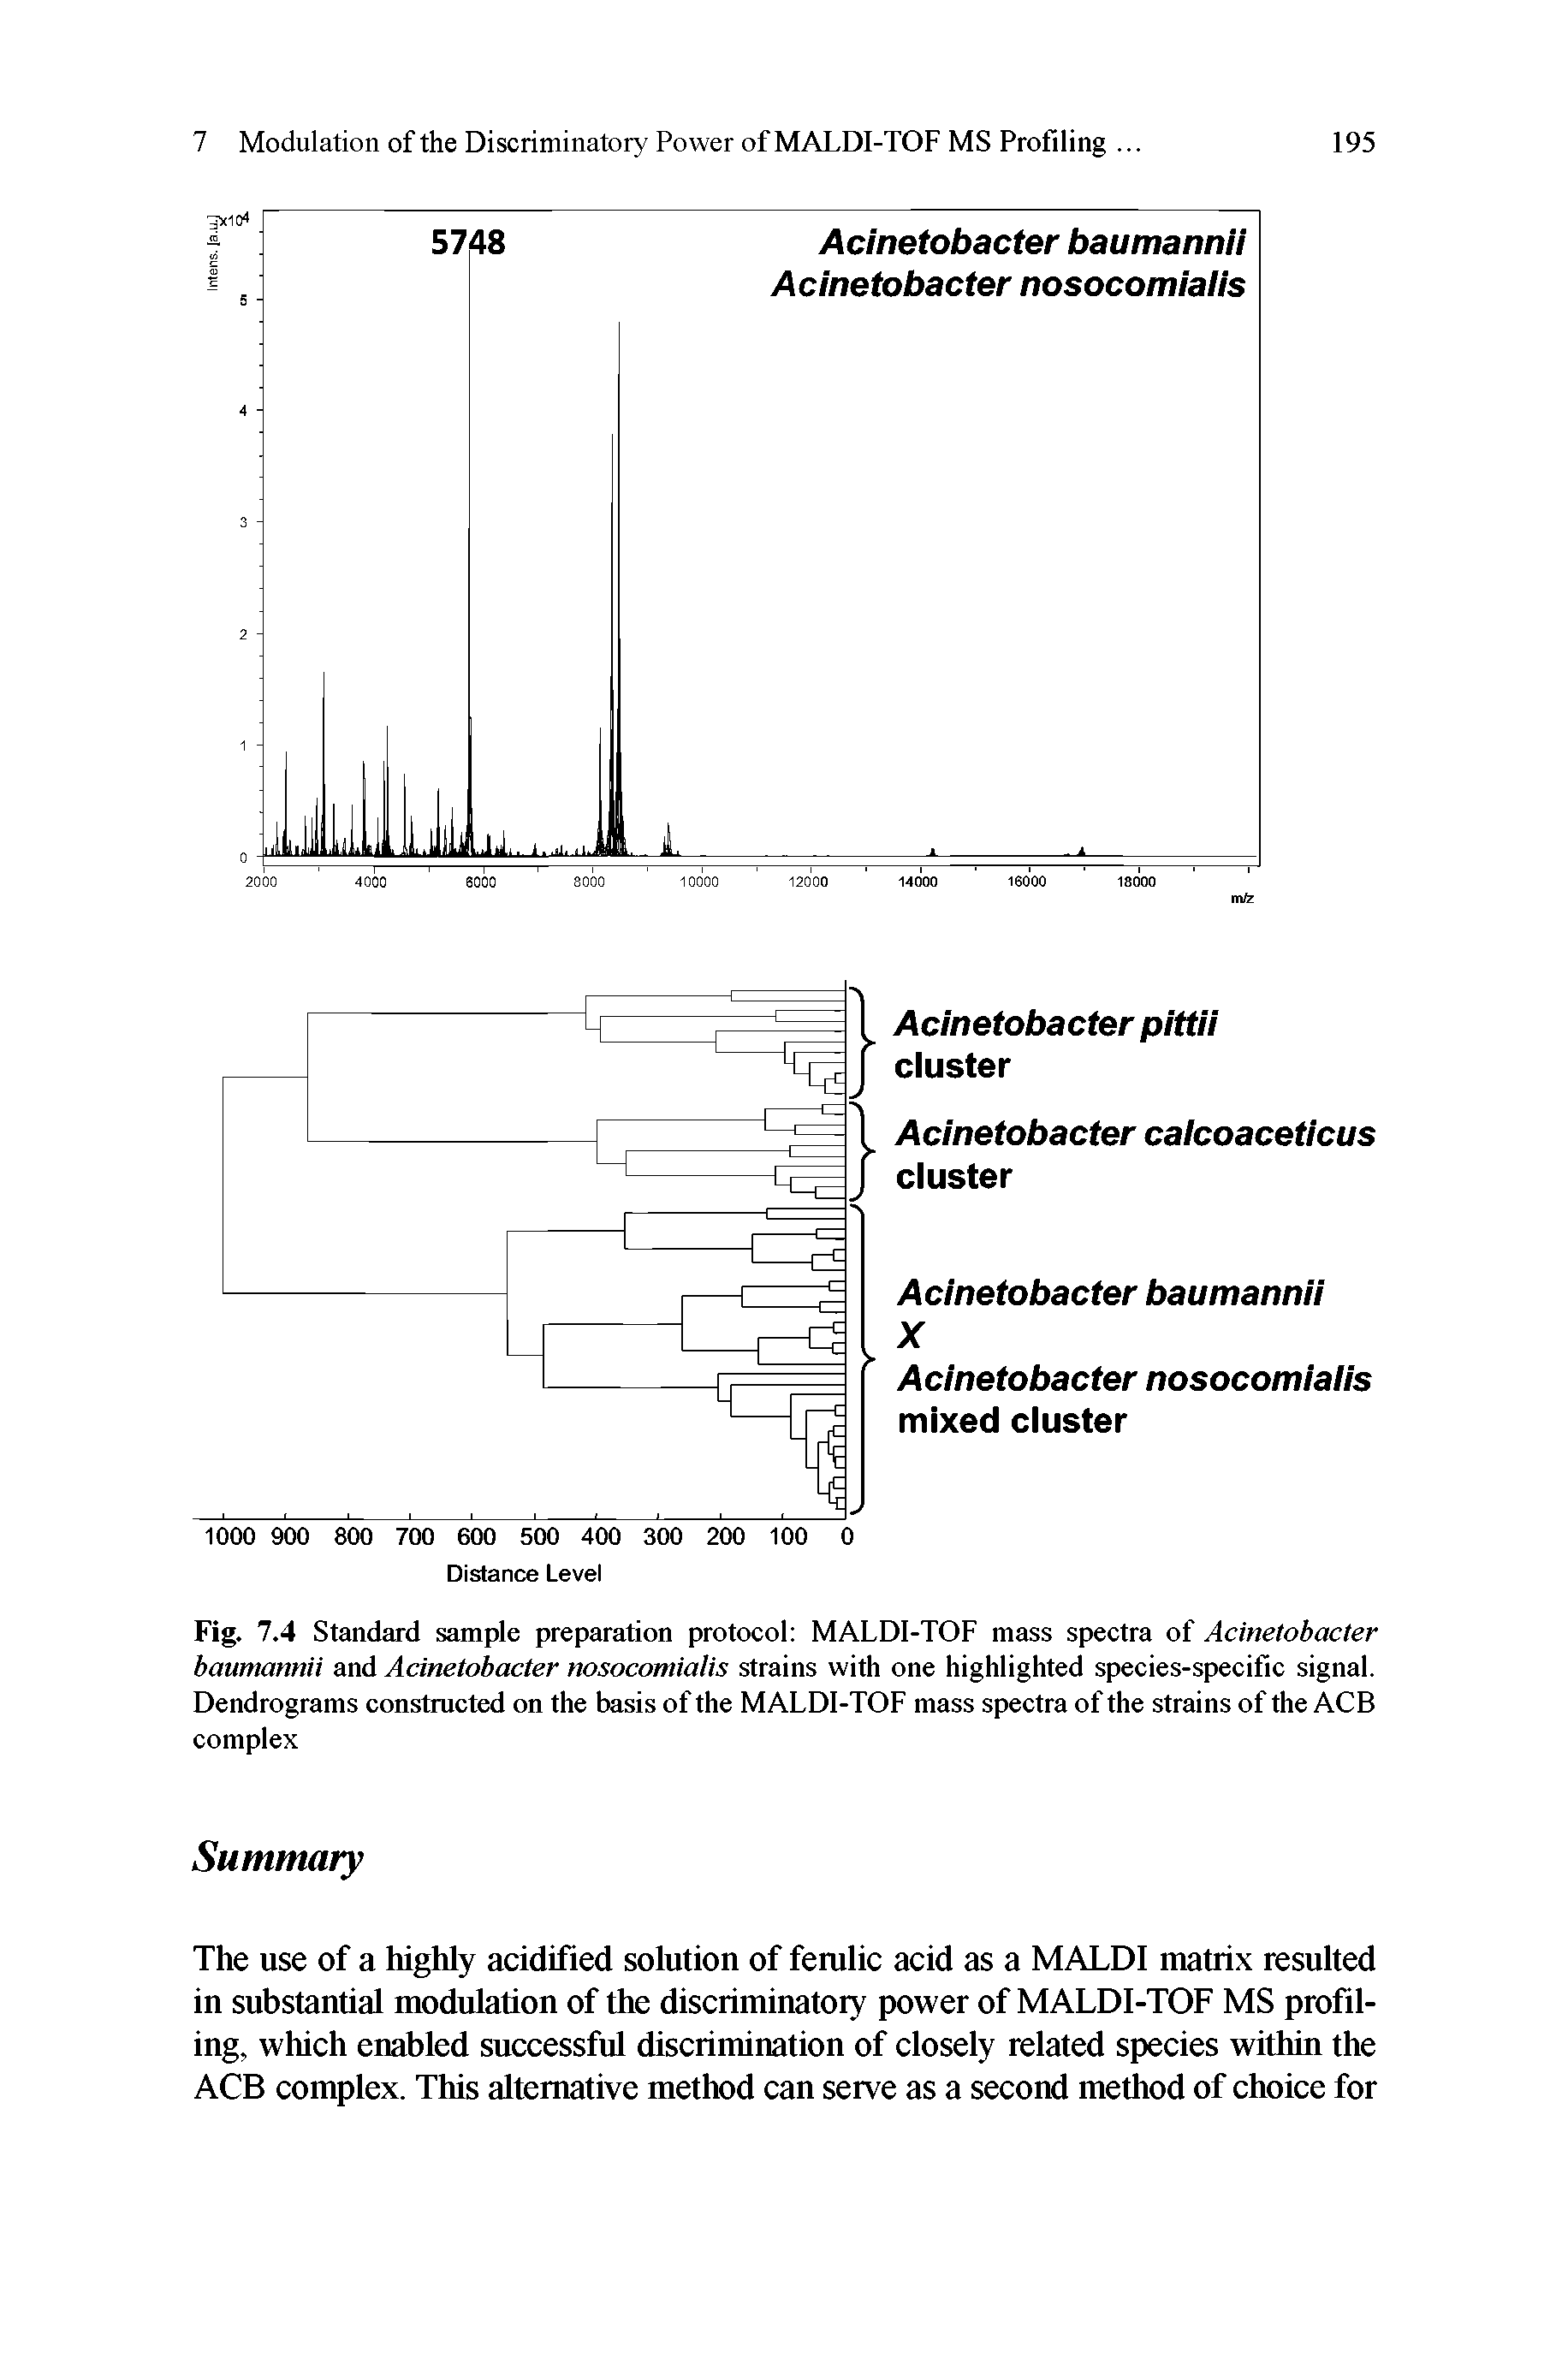 Fig. 7.4 Standard sample preparation protocol MALDI-TOF mass spectra of Acinetobacter baumannii and Acinetobacter nosocomiaiis strains with one highlighted species-specific signal. Dendrograms constructed on the basis of the MALDI-TOF mass spectra of the strains of the ACB complex...